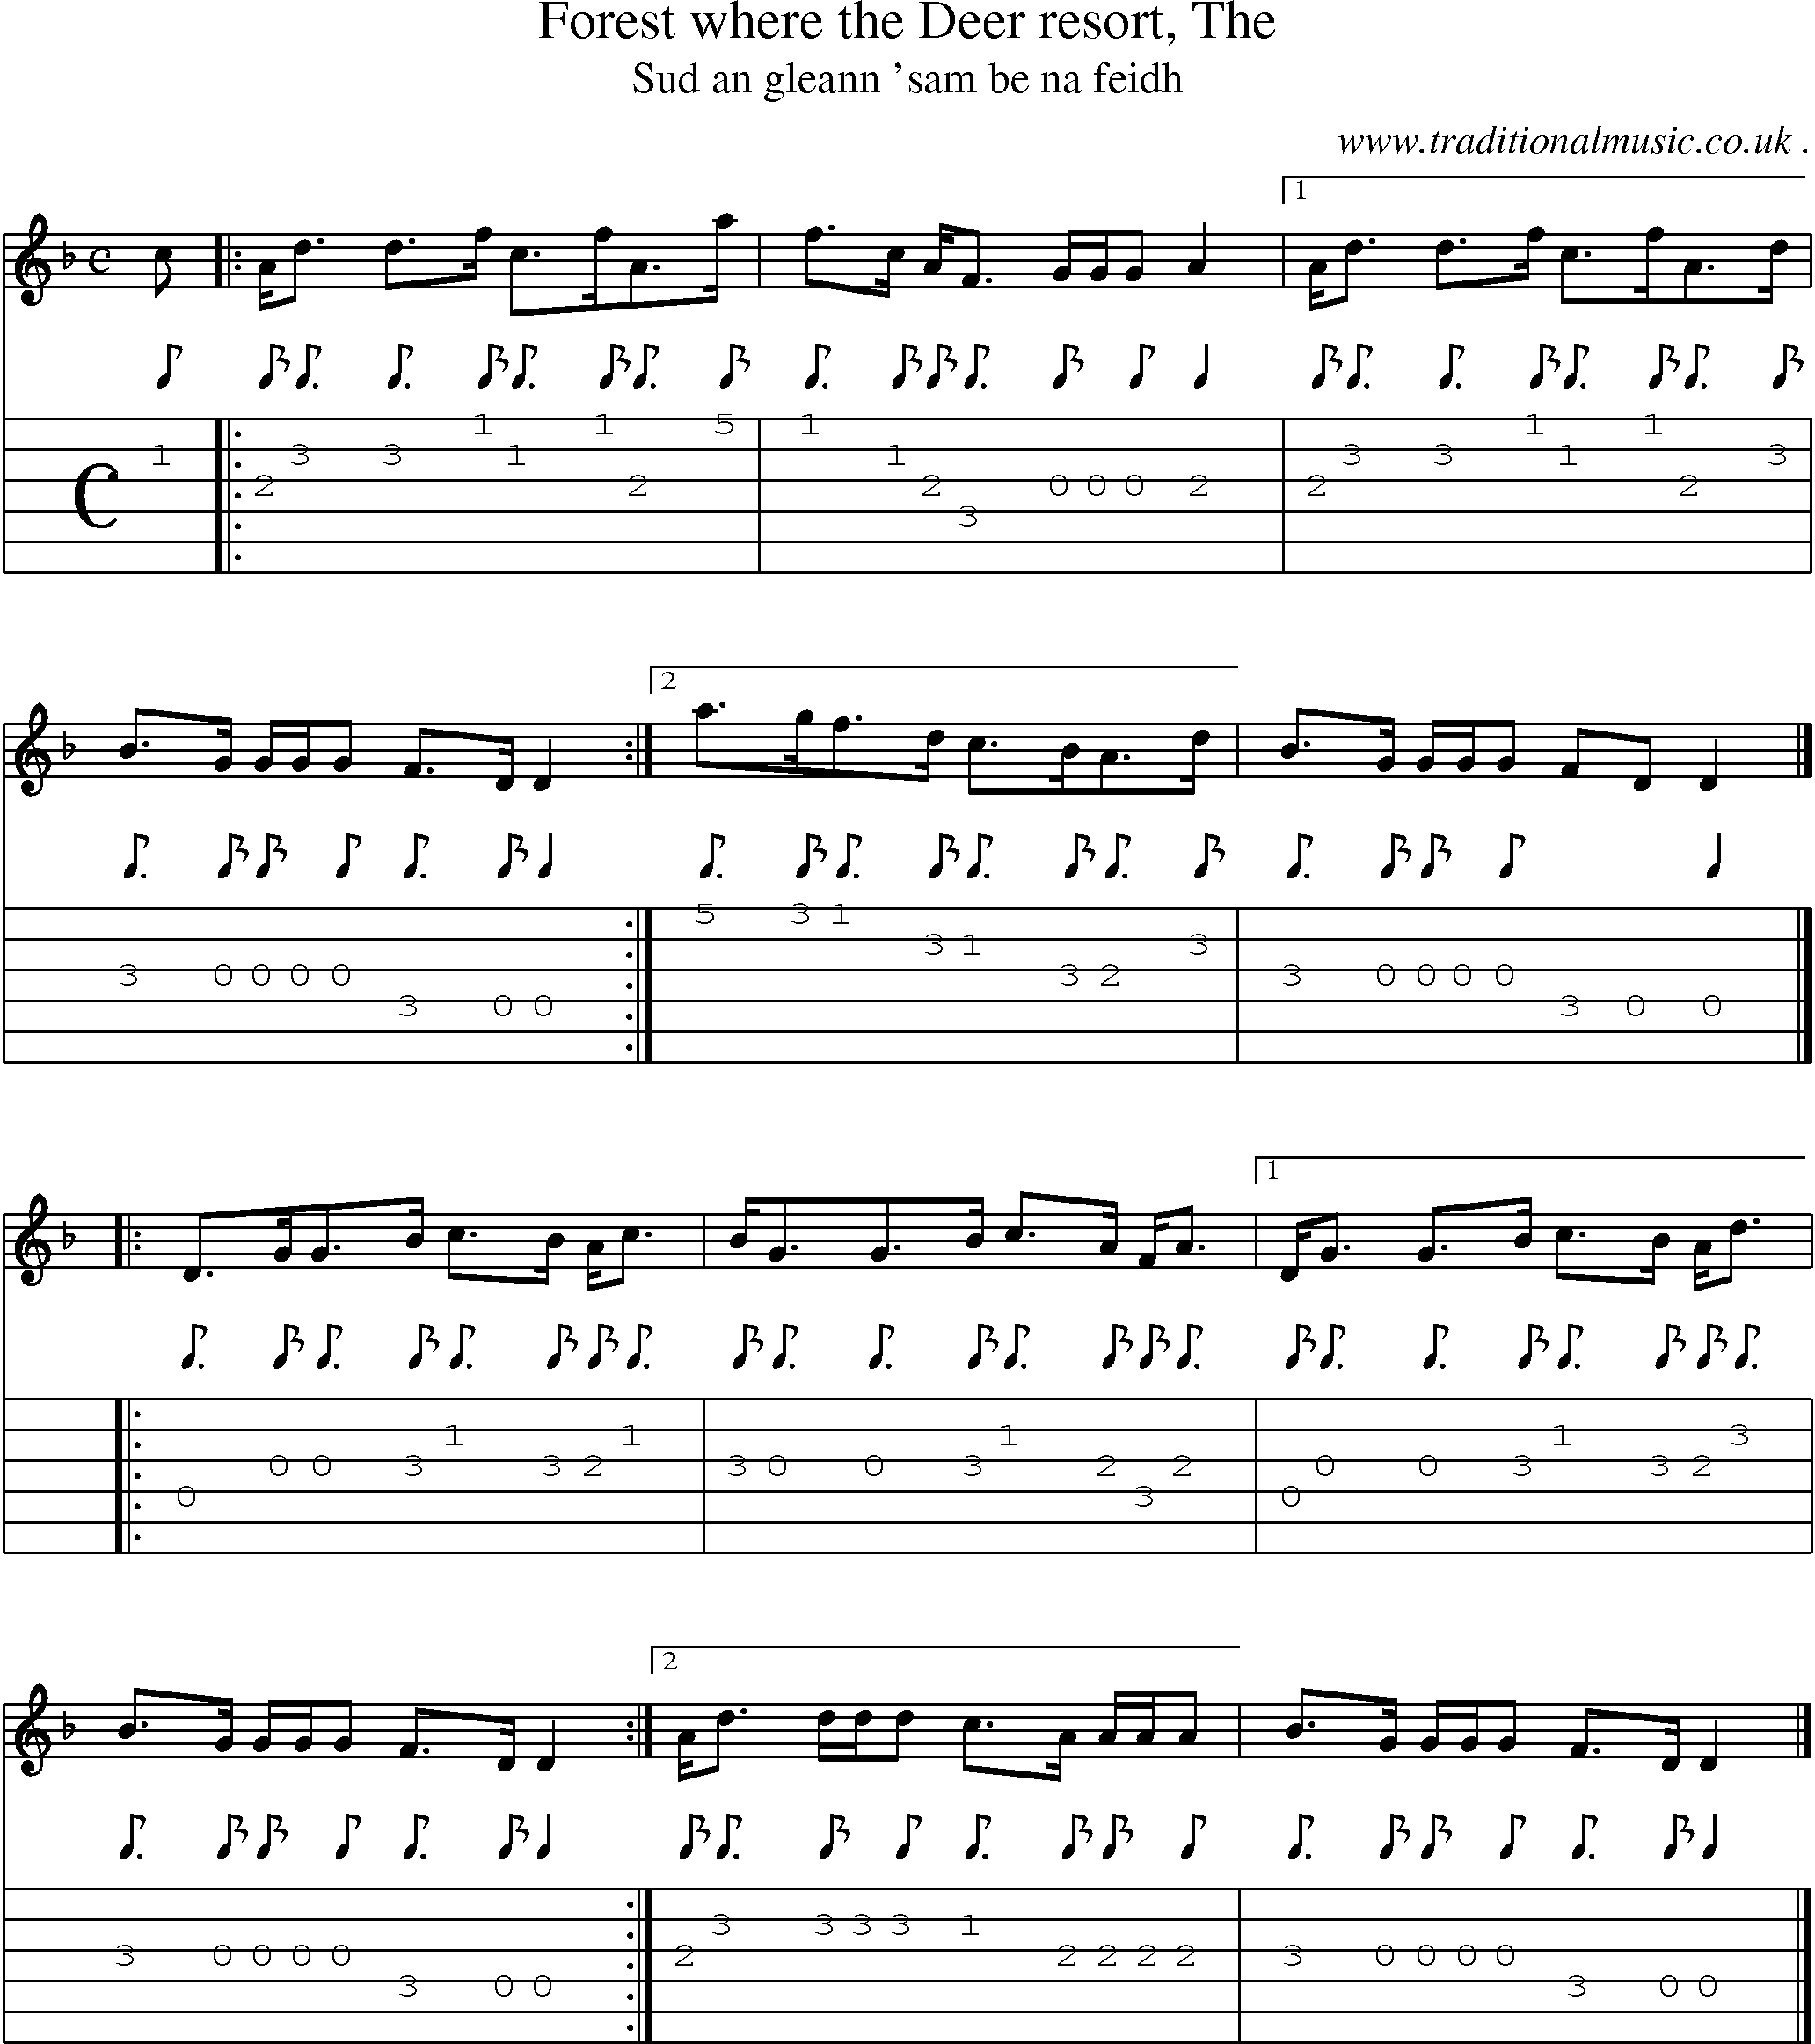 Sheet-music  score, Chords and Guitar Tabs for Forest Where The Deer Resort The